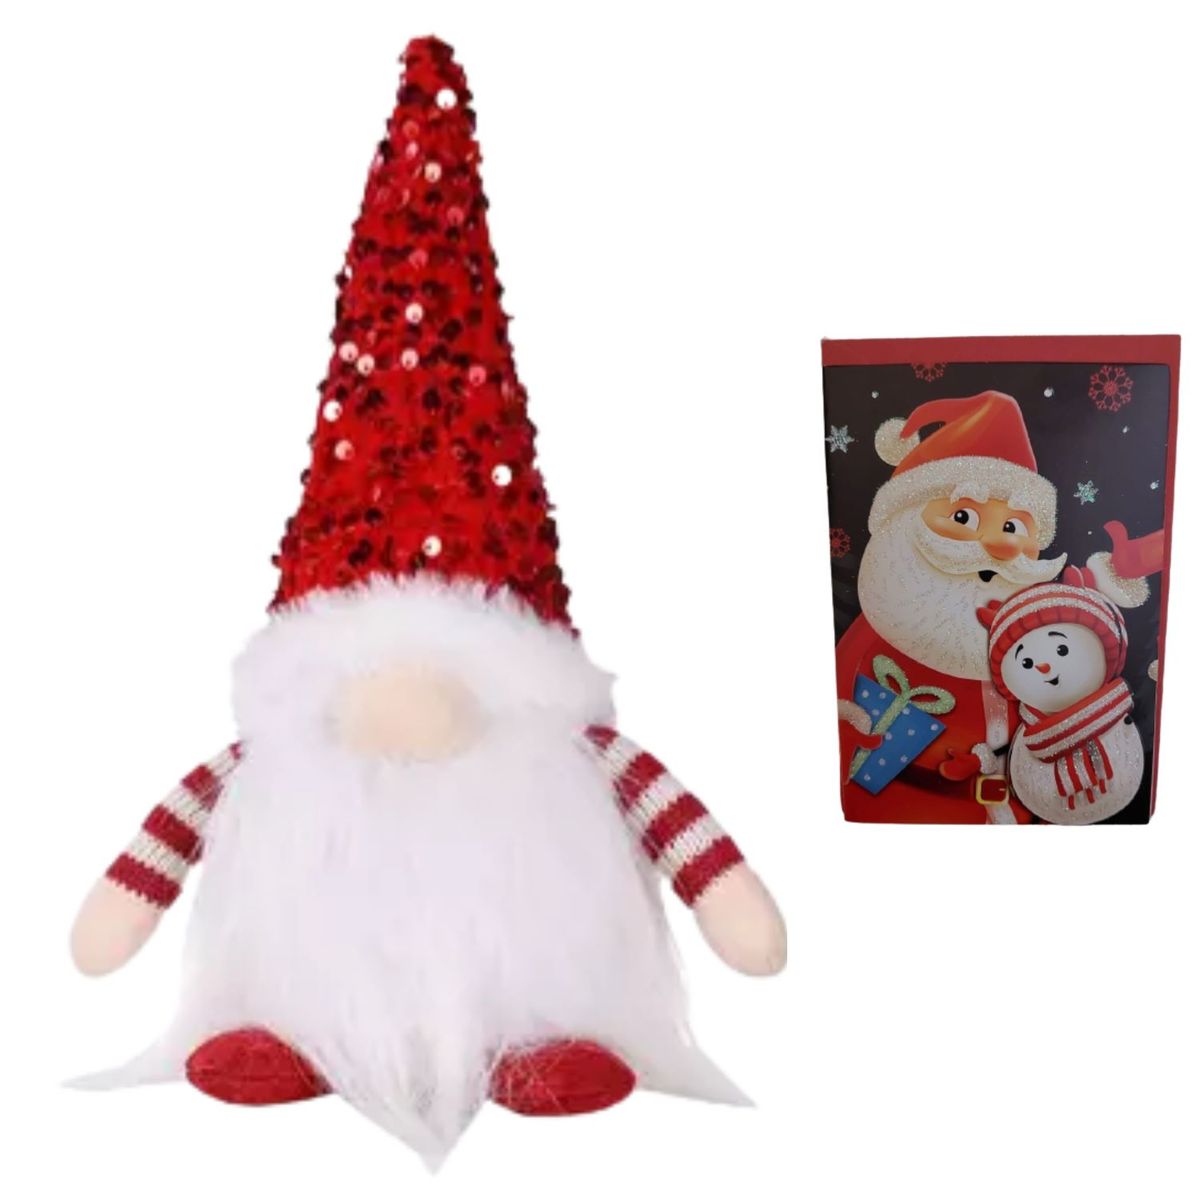 Christmas Decorations: Glowing Santa Dwarf with 4 Gift Cards